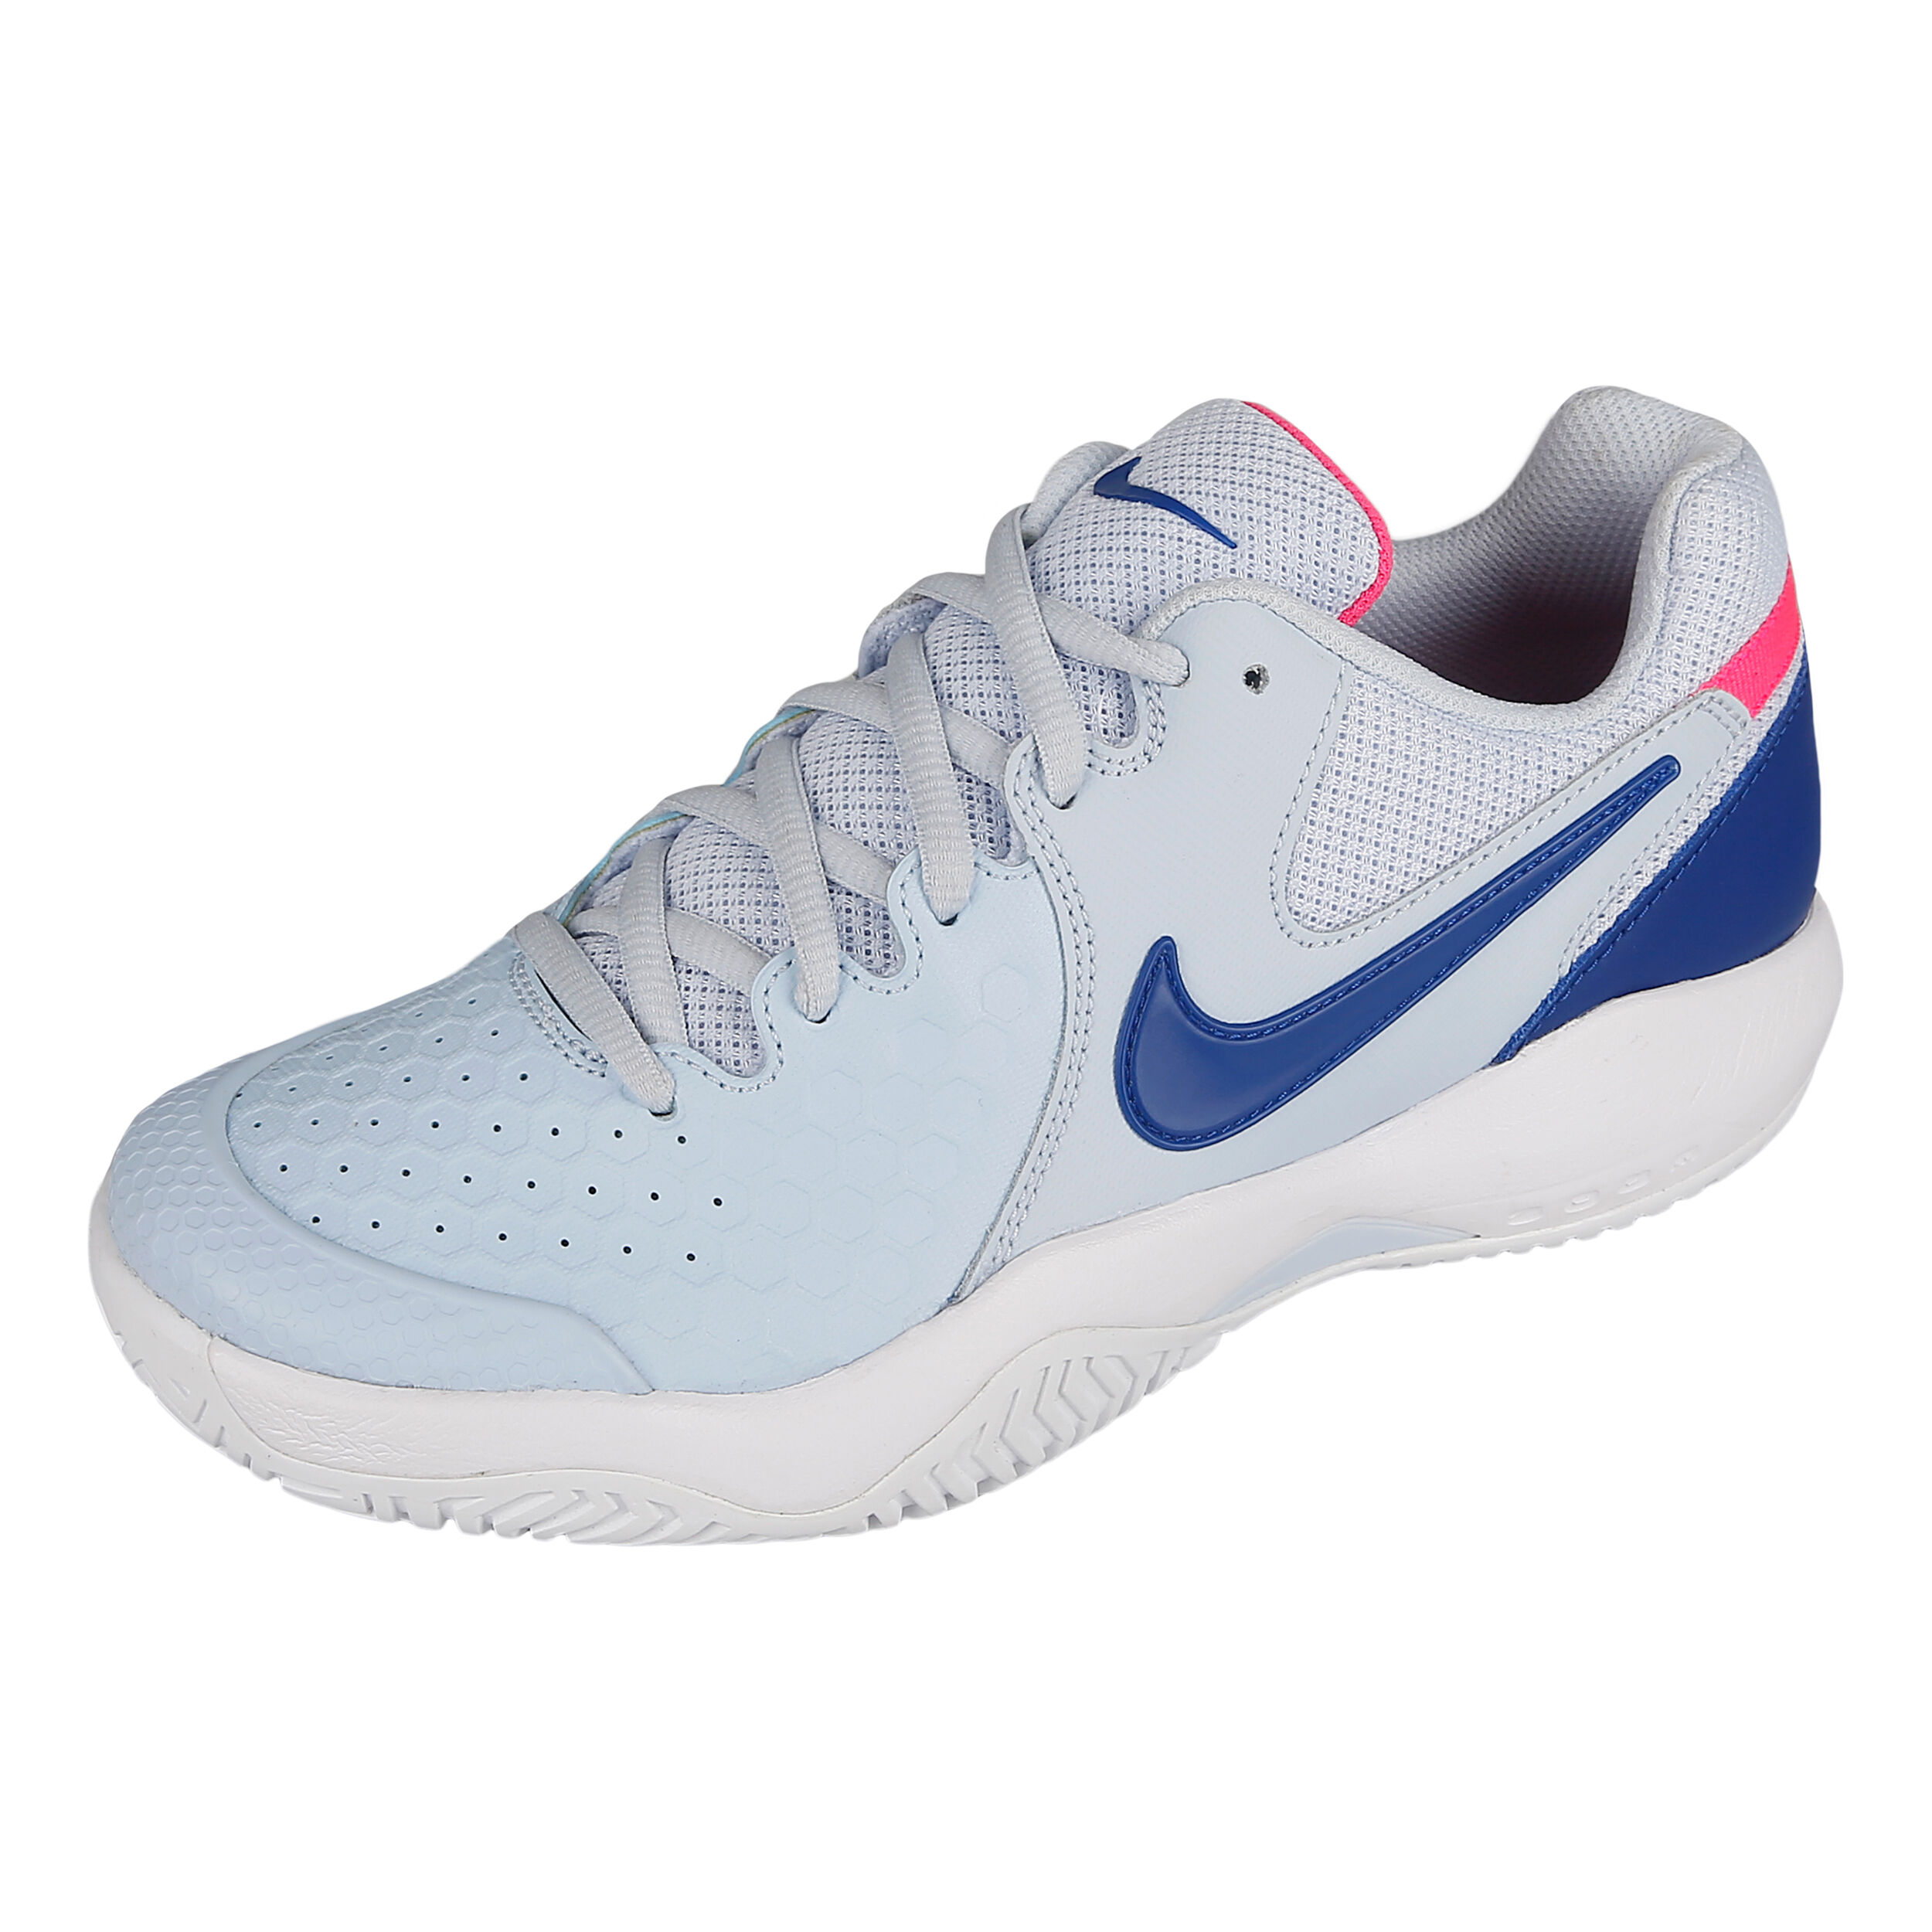 nikecourt air zoom resistance review